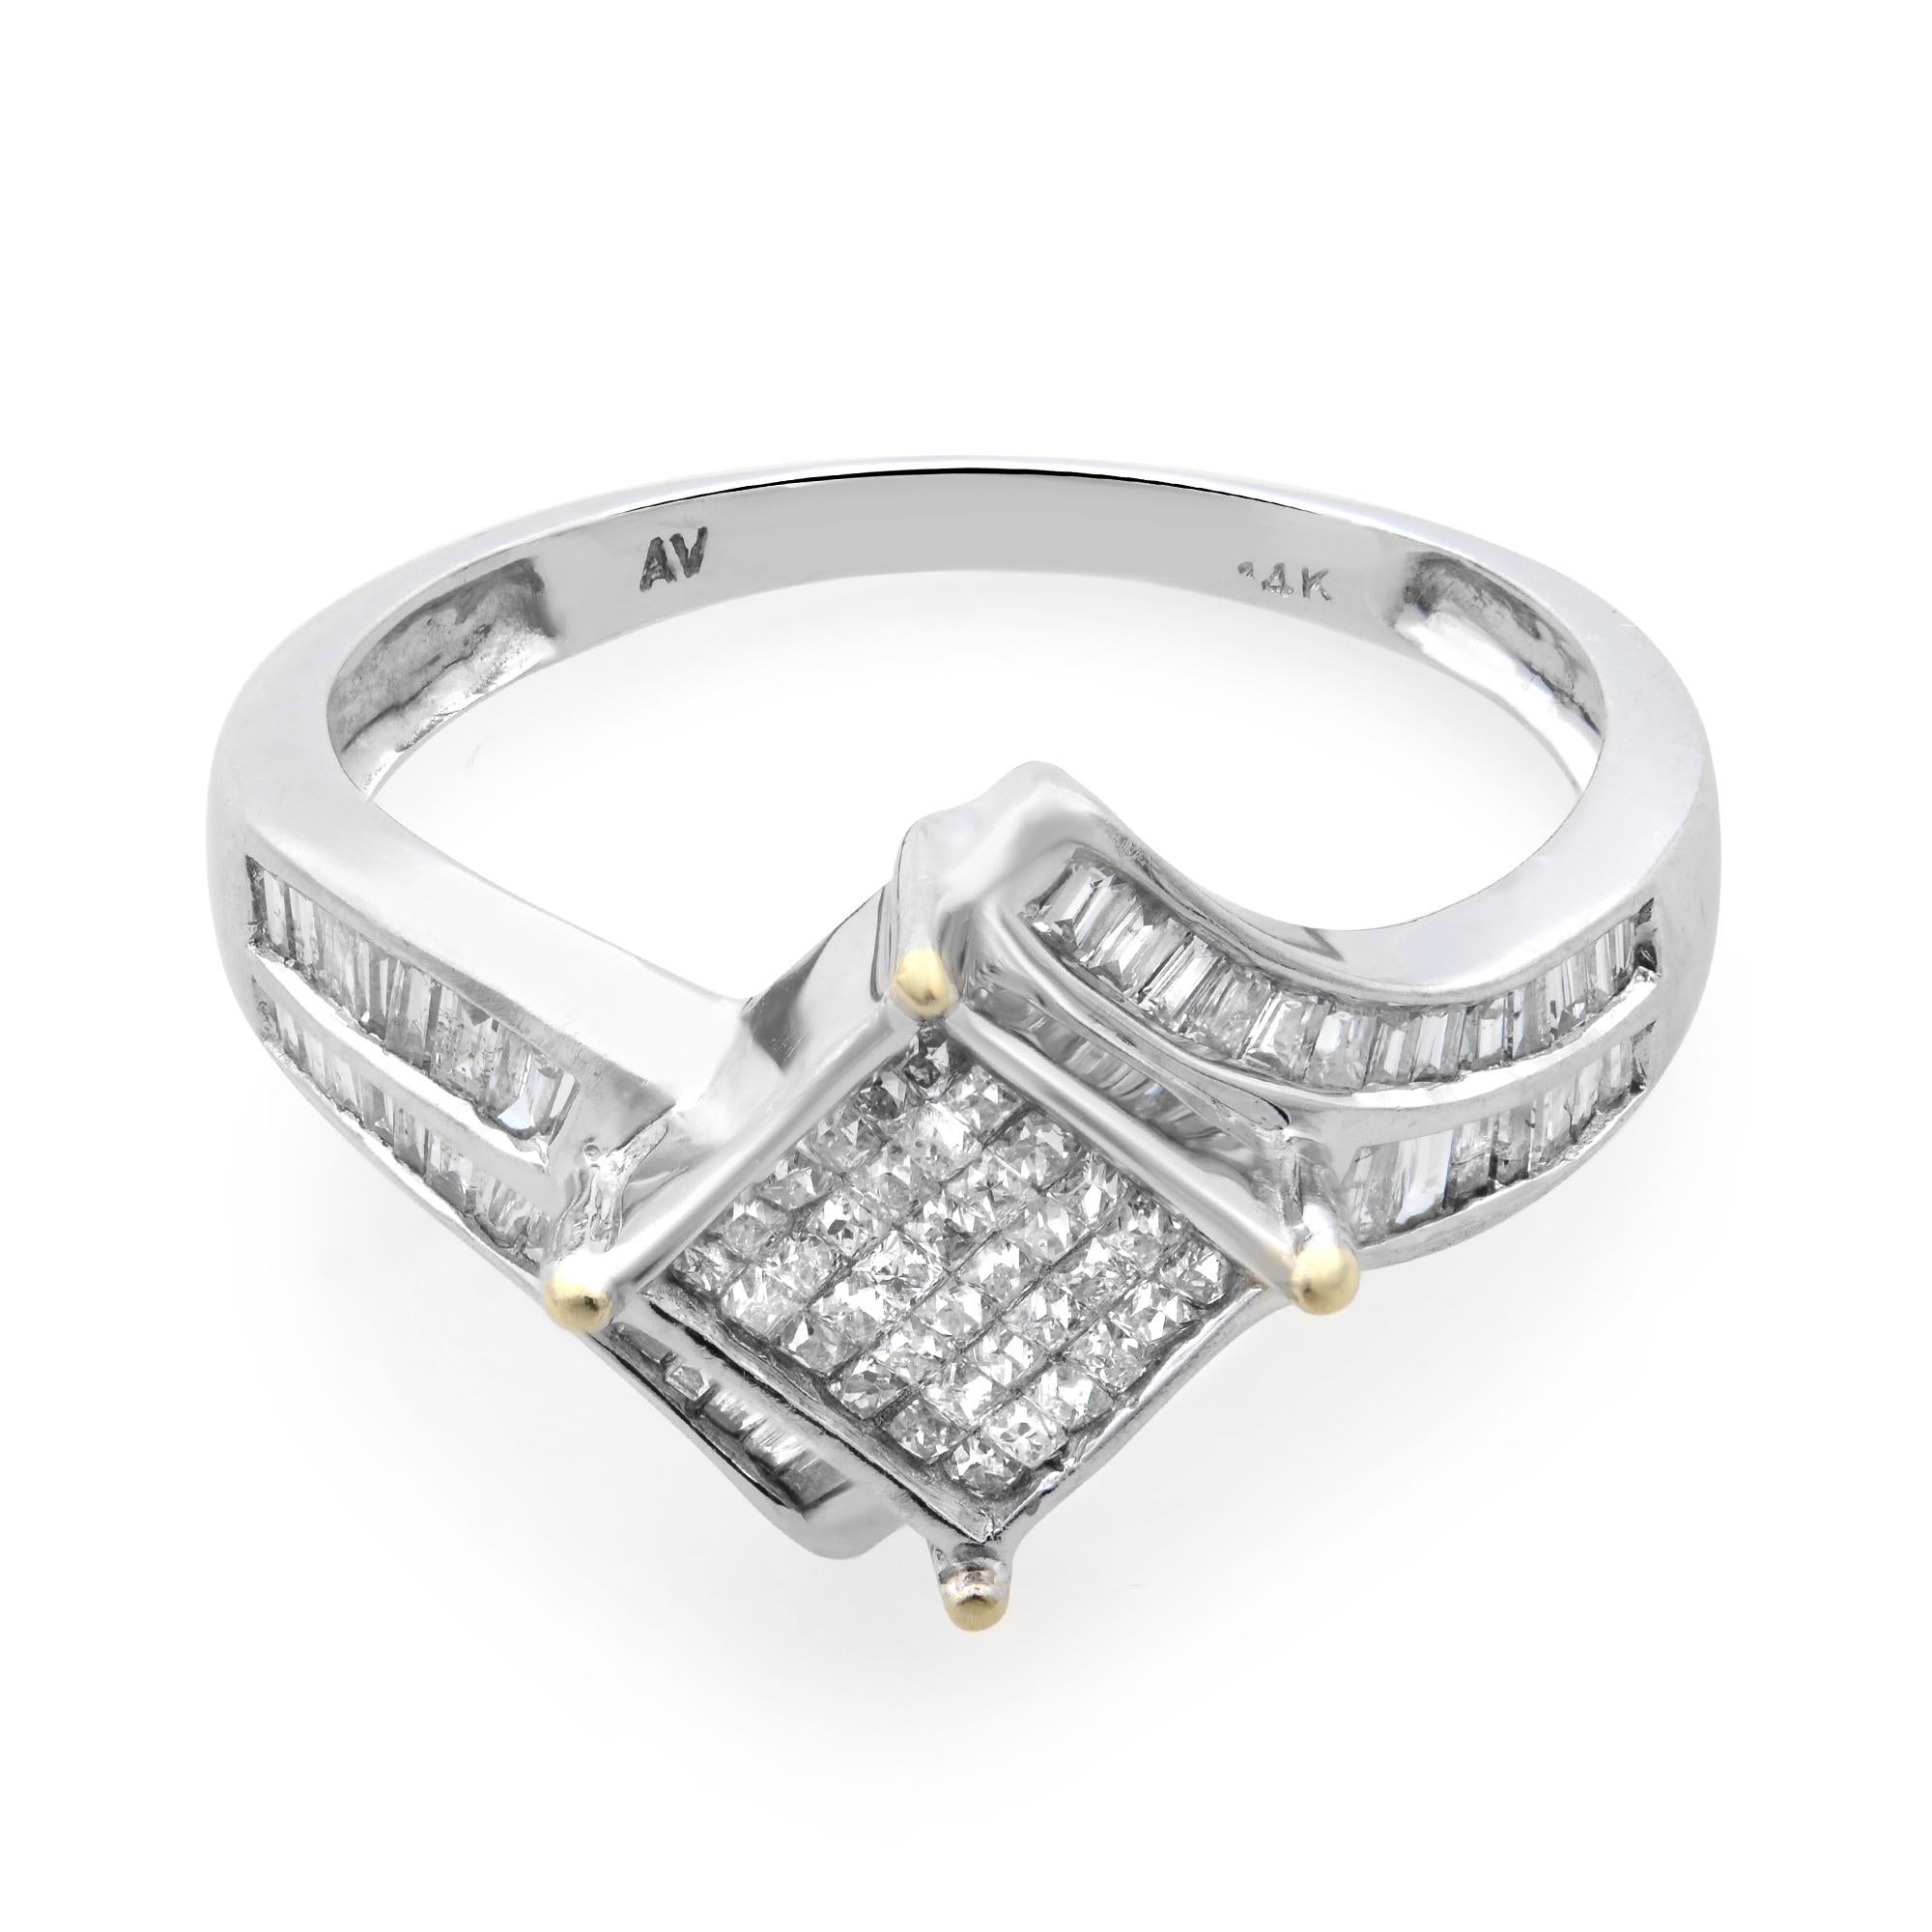 This gorgeous ring is encrusted with tiny princess cut diamonds in the center square shaped shank with channel set baguette cut diamonds on the ring shoulders. Crafted in high polished 14K white gold. Total diamond carat weight: 0.50 carat. Diamond